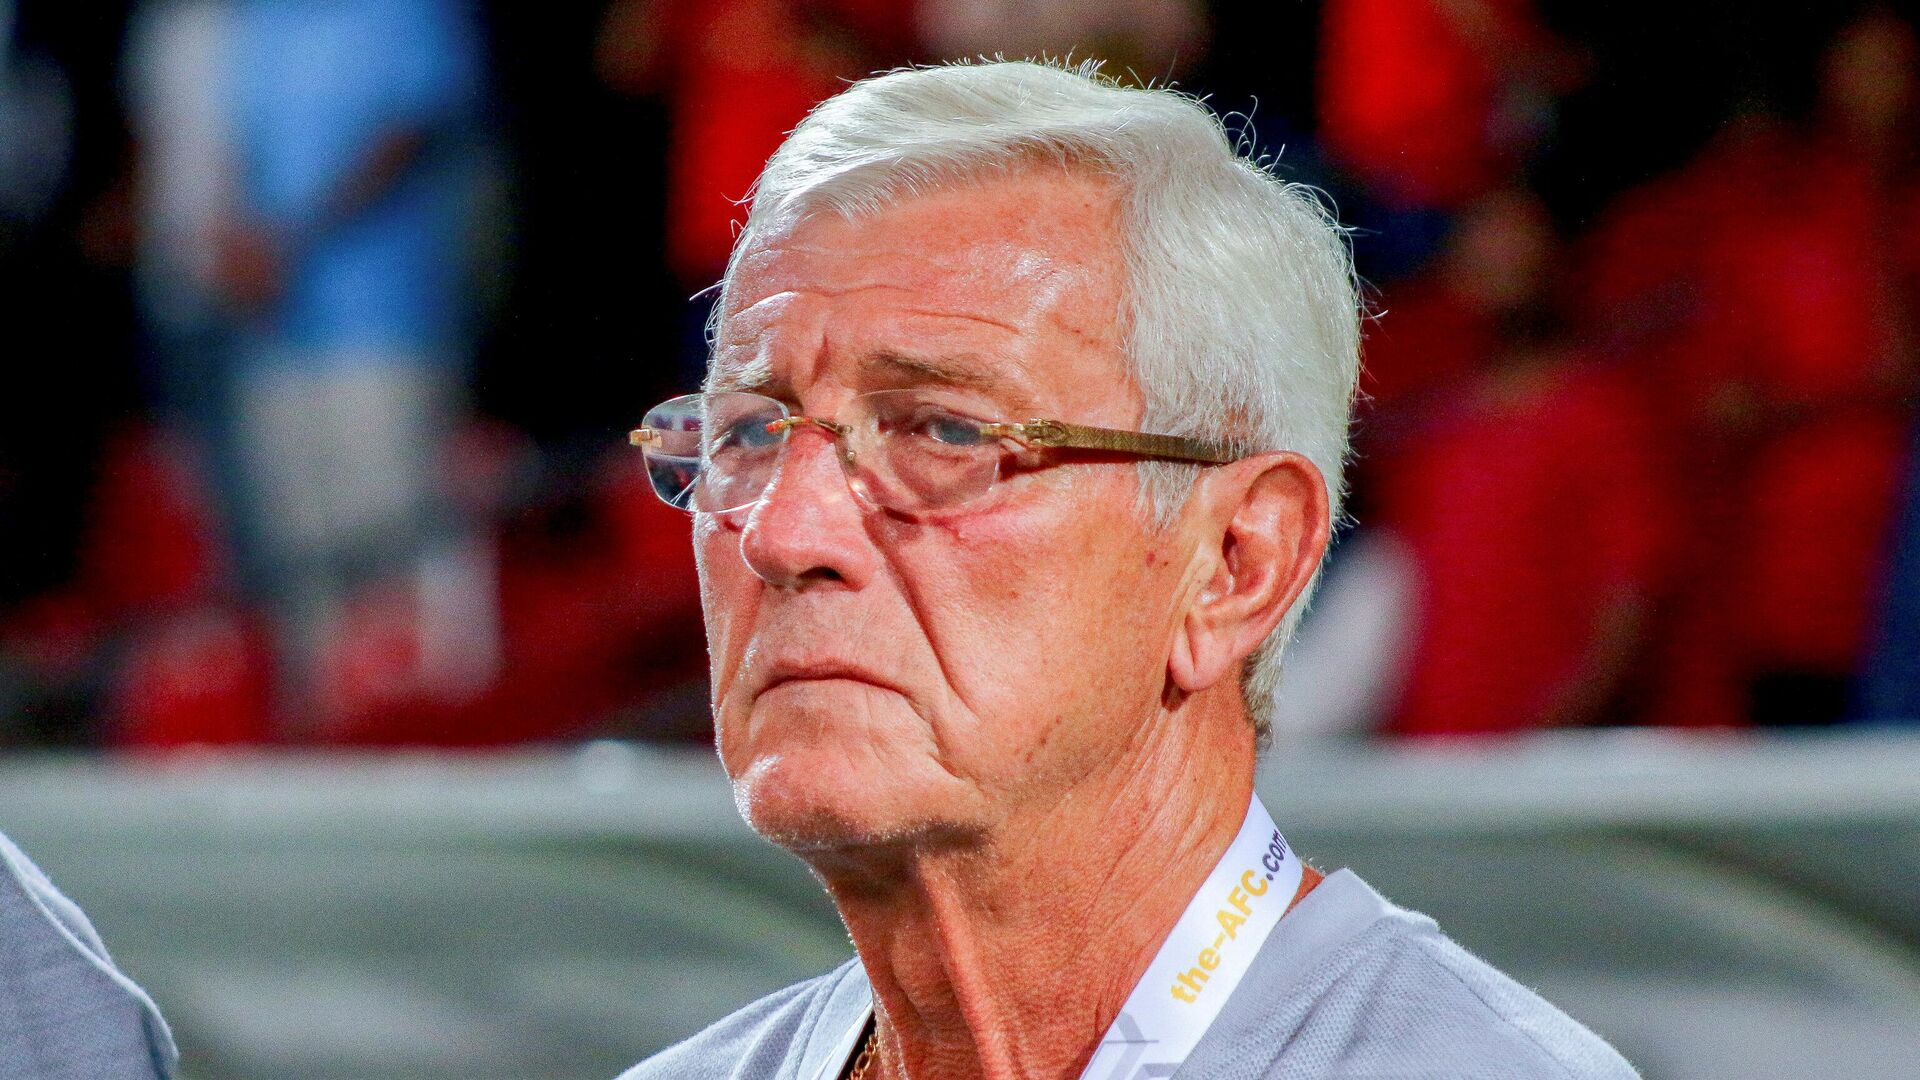 China's head coach Marcello Lippi watches the Qatar 2022 FIFA World Cup second round Group A qualification football match between Maldives and Chian at Rasmee Dhandu National Stadium in Male on September 10, 2019. (Photo by Ahmed SHURAU / AFP) - РИА Новости, 1920, 16.03.2021